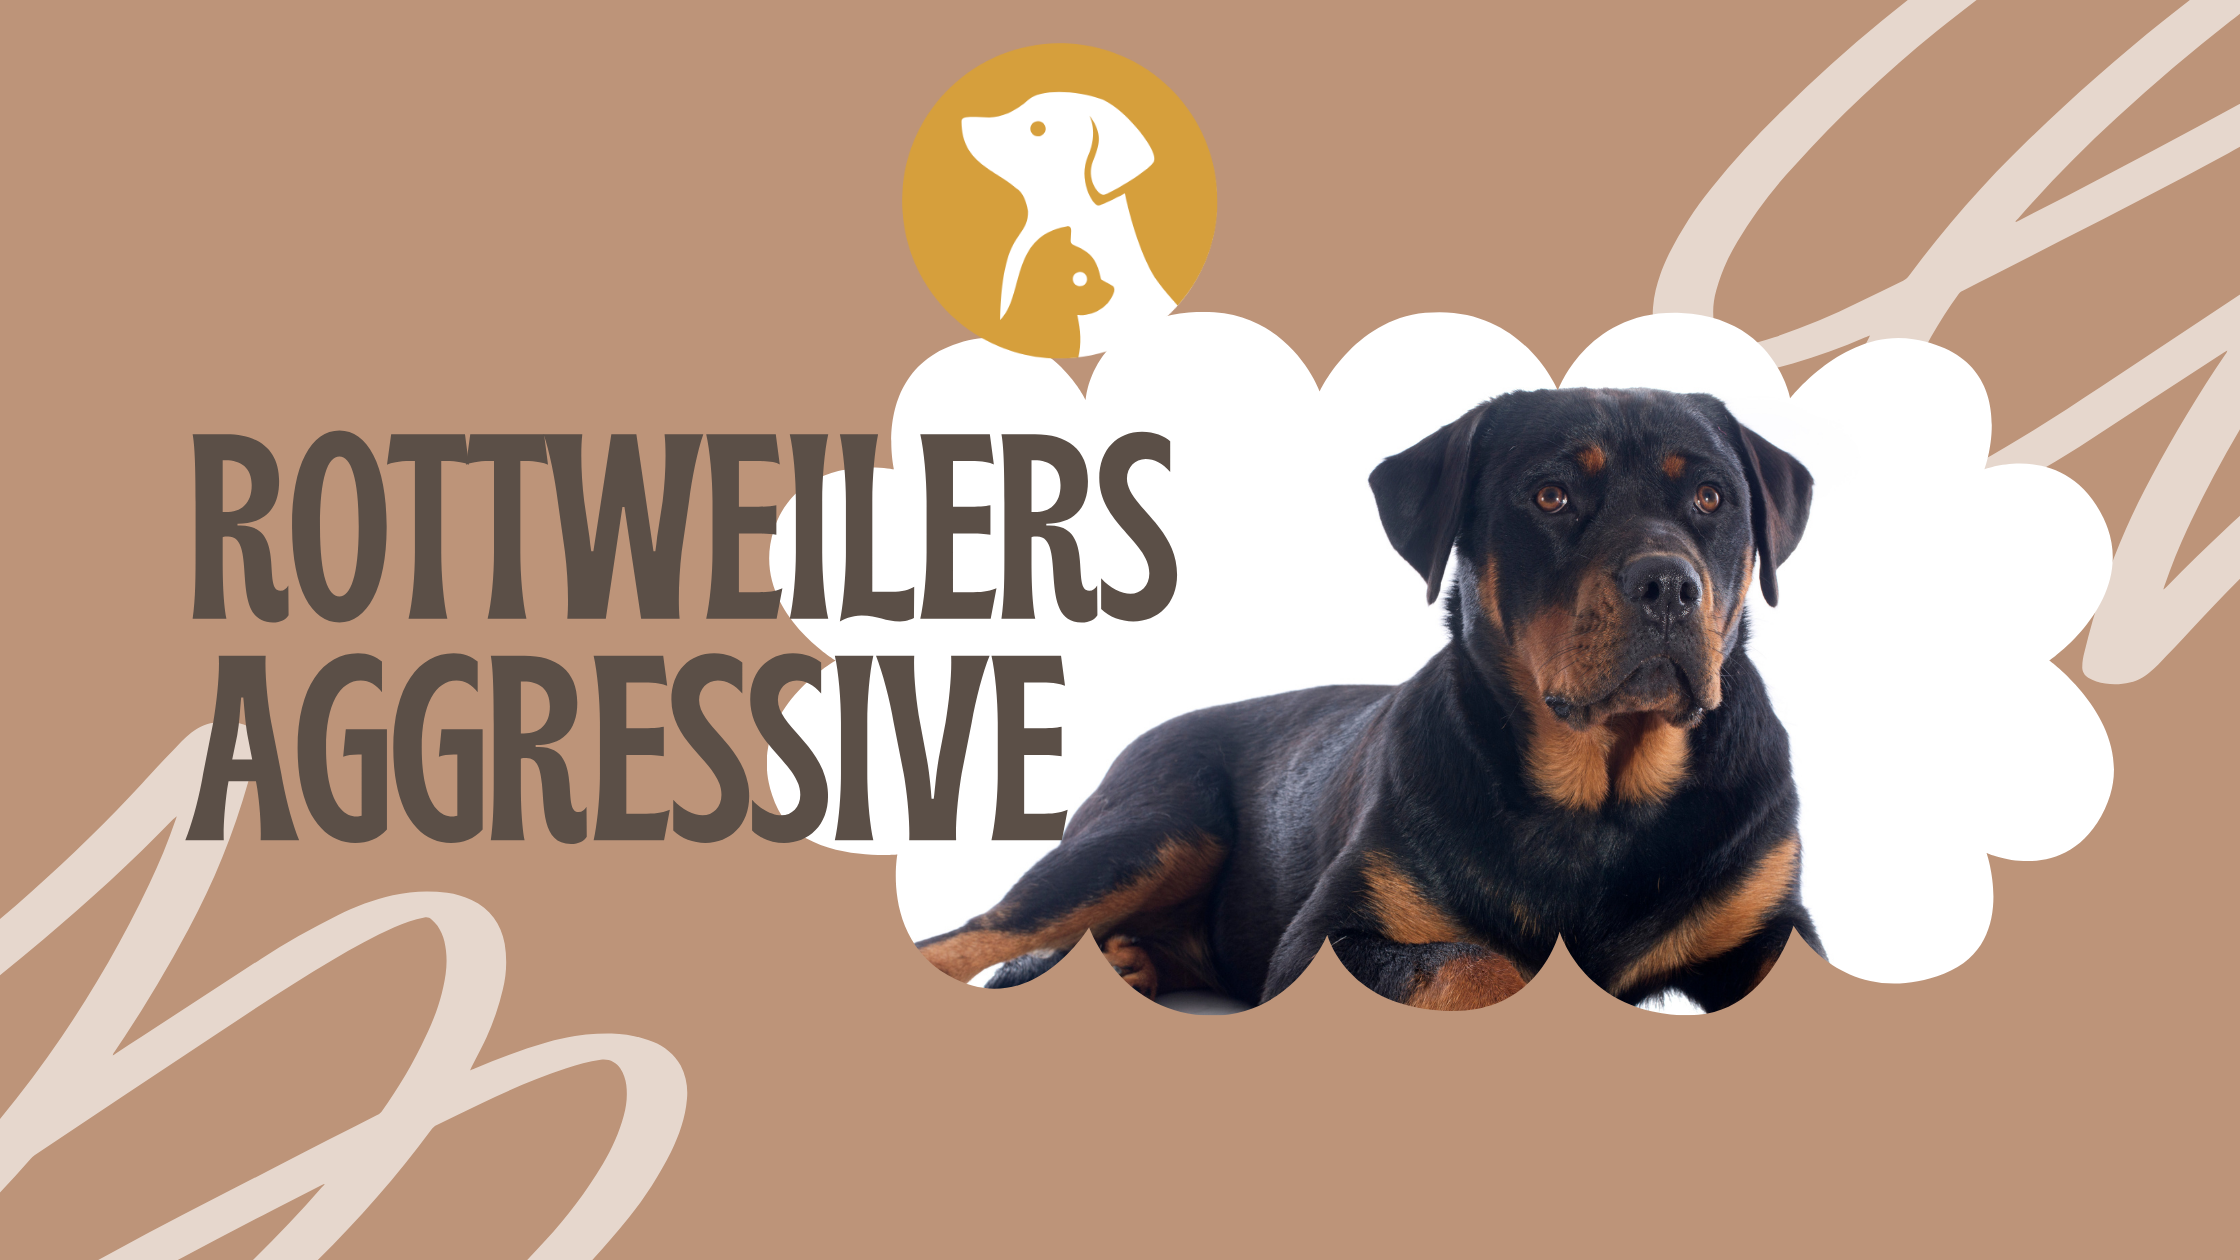 Are Rottweilers Aggressive